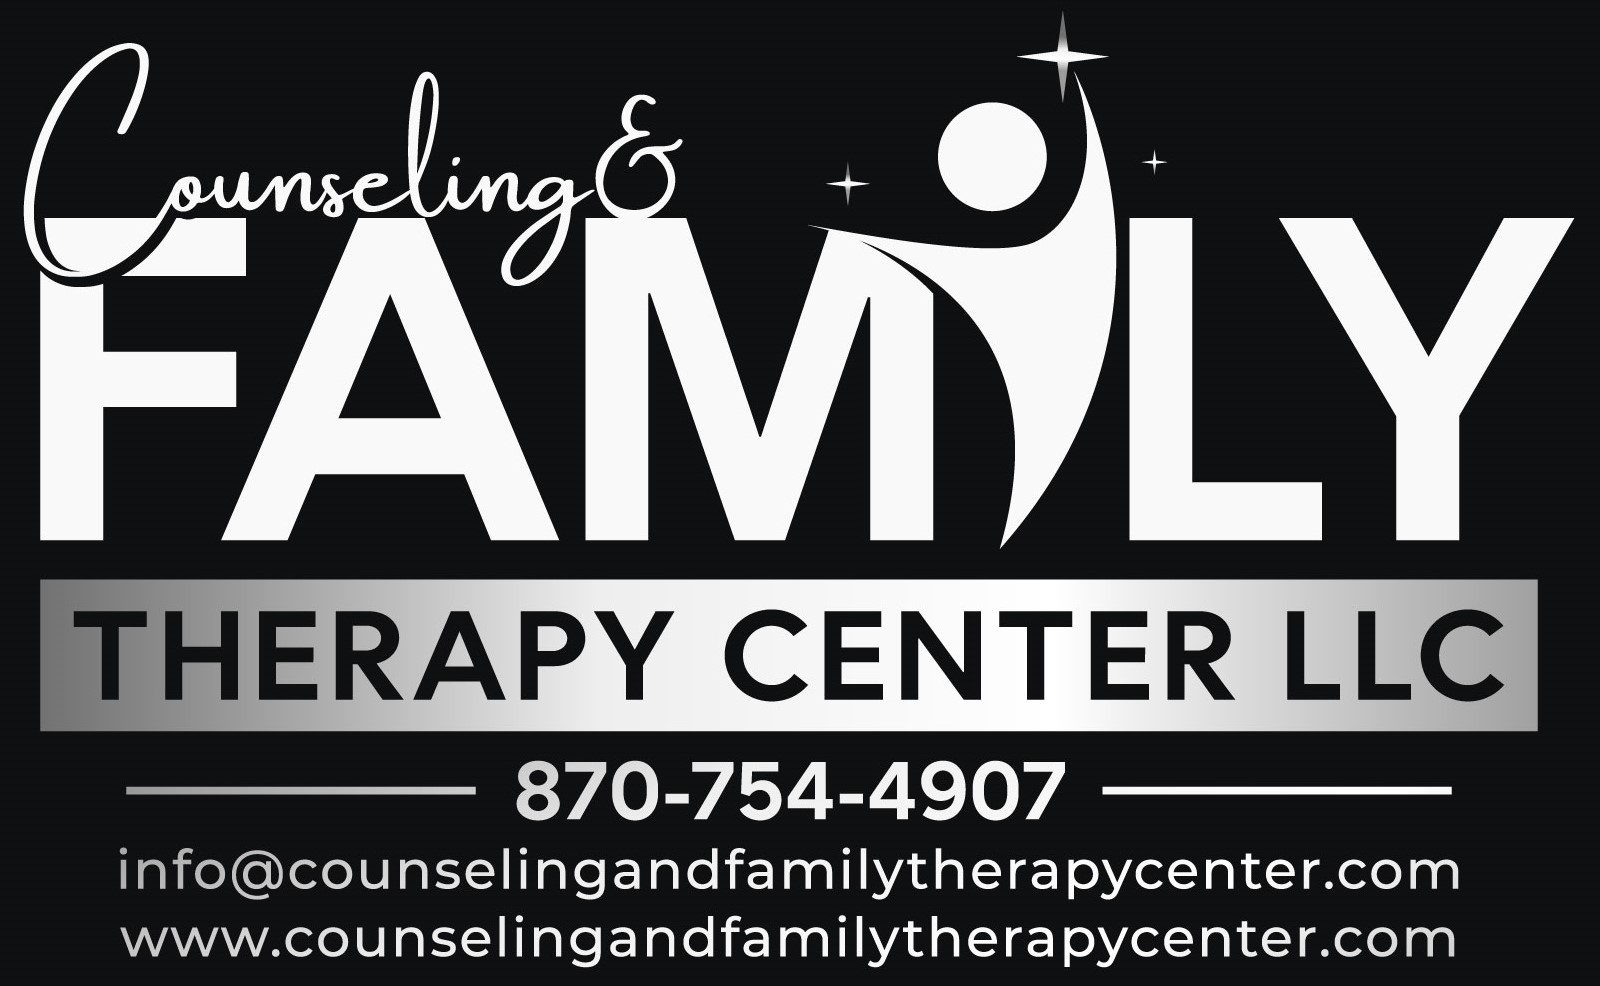 Counseling & Family Therapy Center, LLC